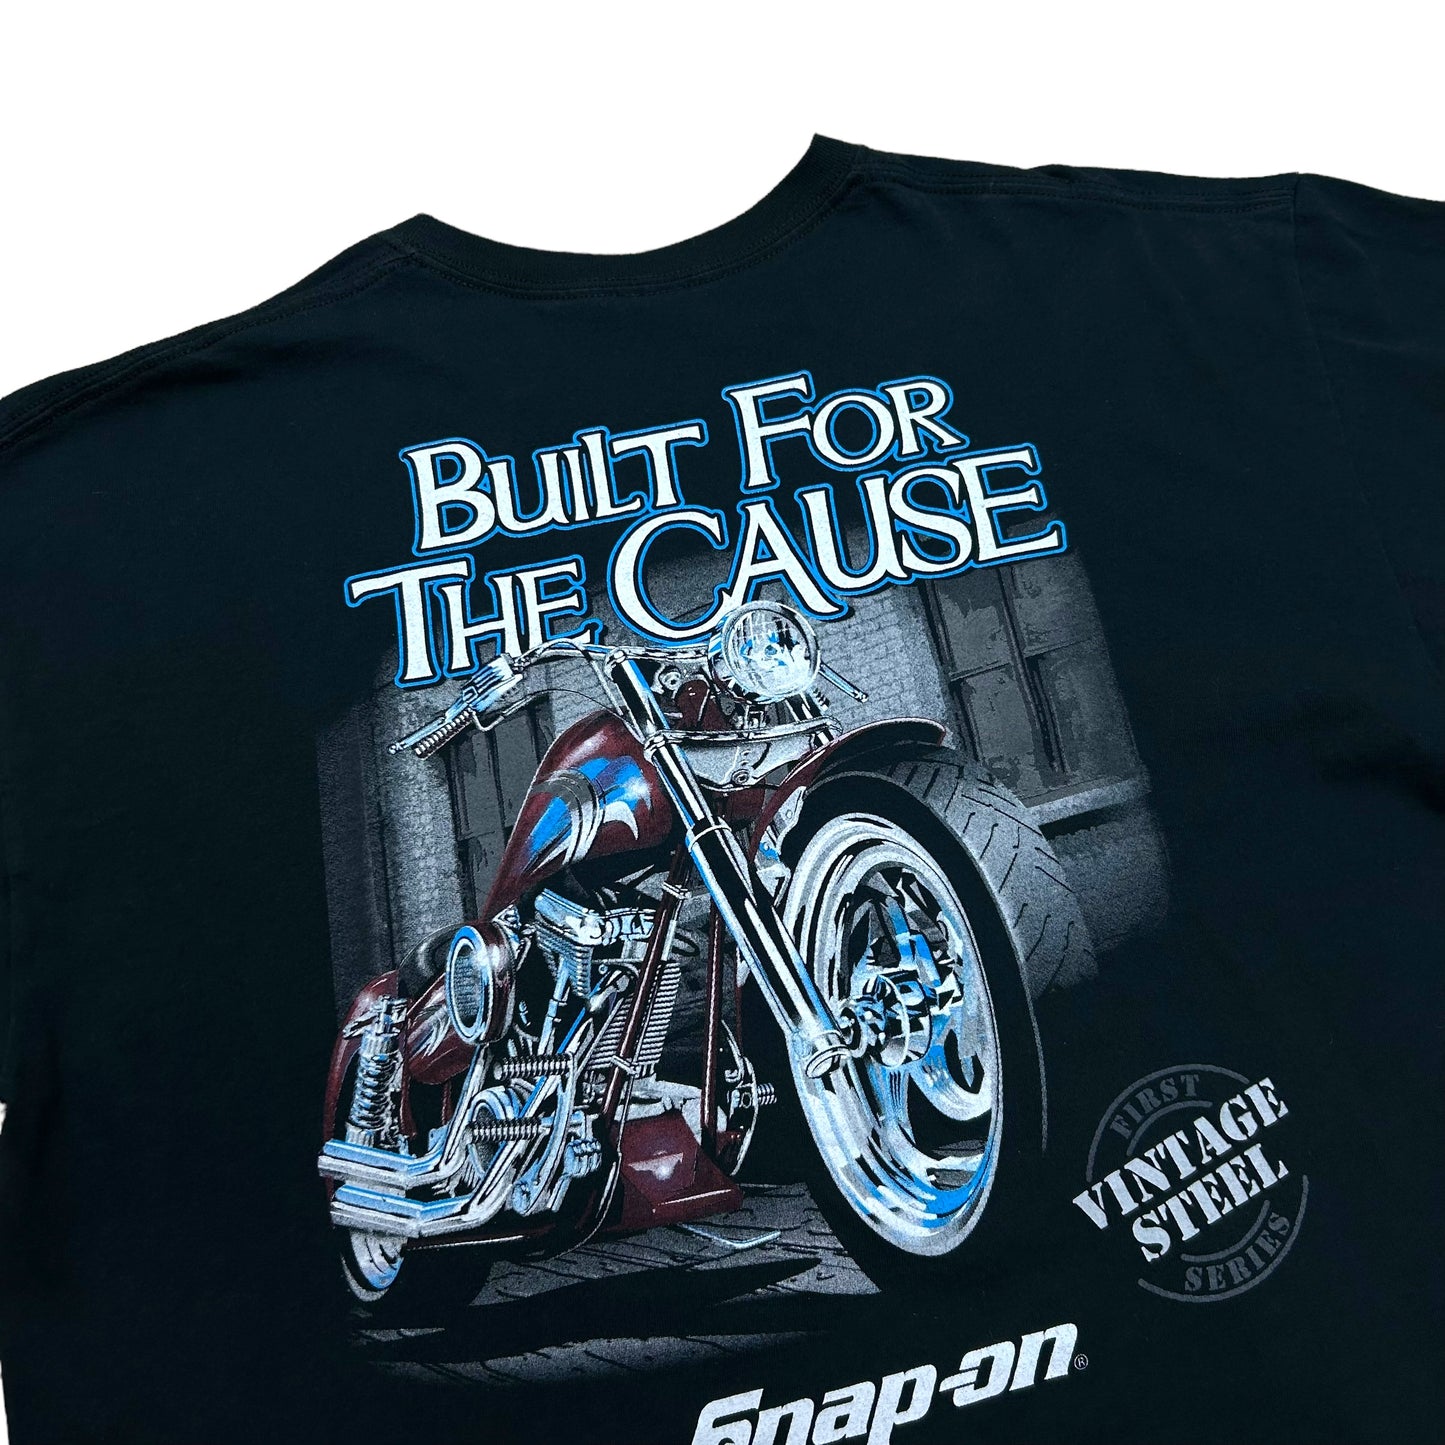 Late 2000s Snap-On Tools “Built For The Cause” Black Graphic T-Shirt - Size Large (Fits L/XL)